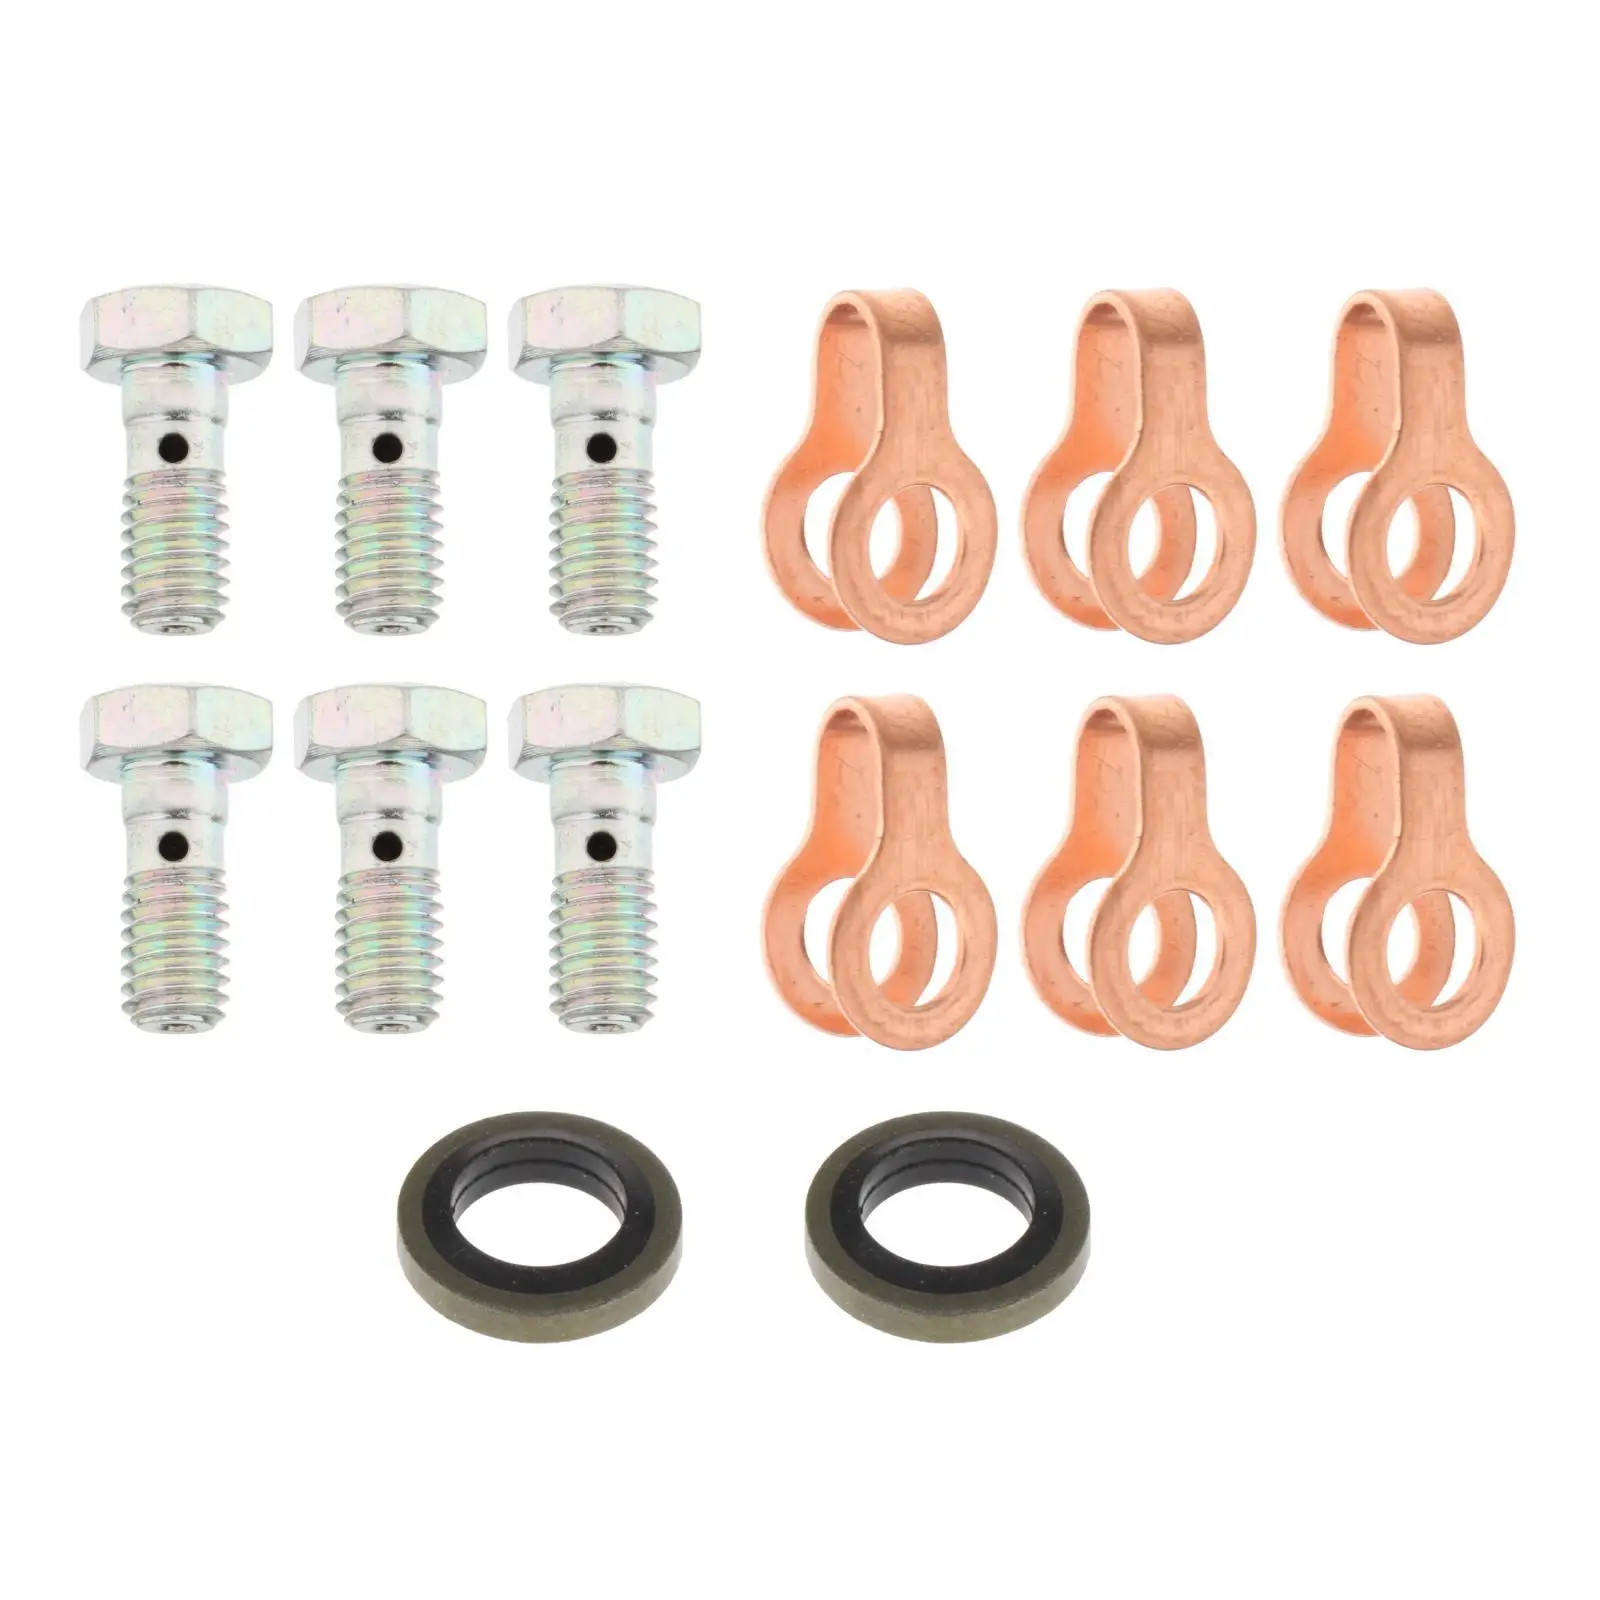 Fuel Return Line Banjo Bolts Replacement Accessories Automotive Bolts and Gasket Repairing Set for Industrial 12V Engines